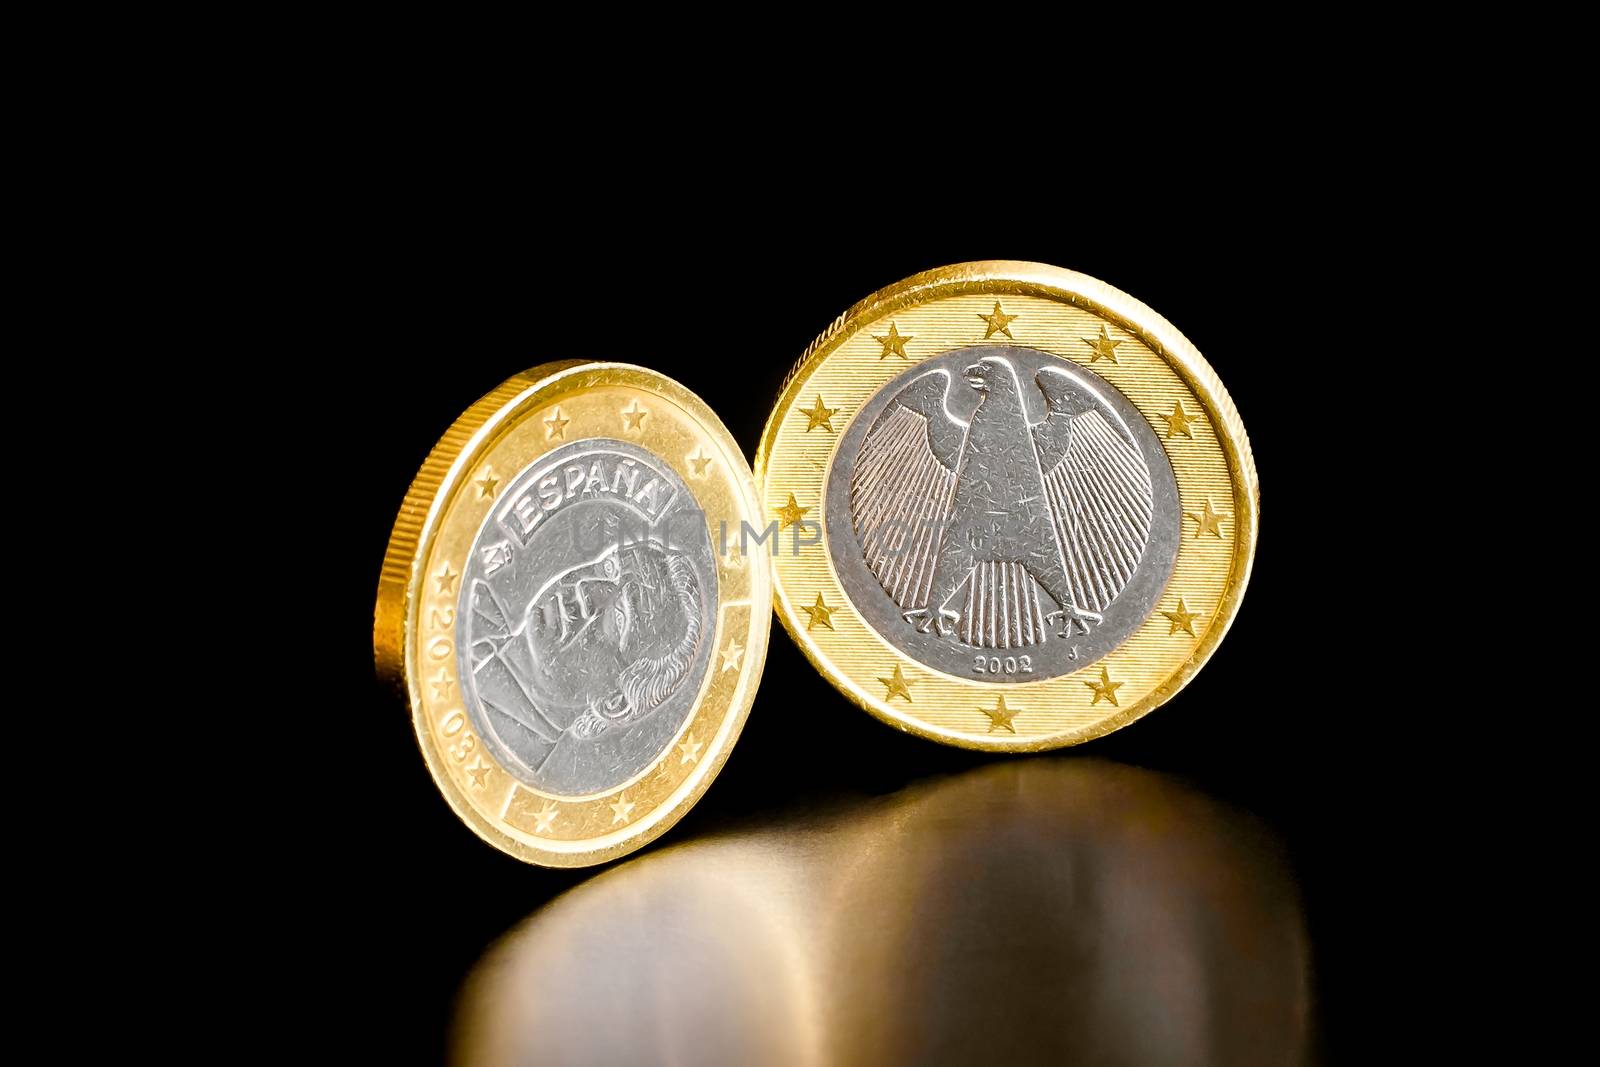 euro coin of germany and spain on black background